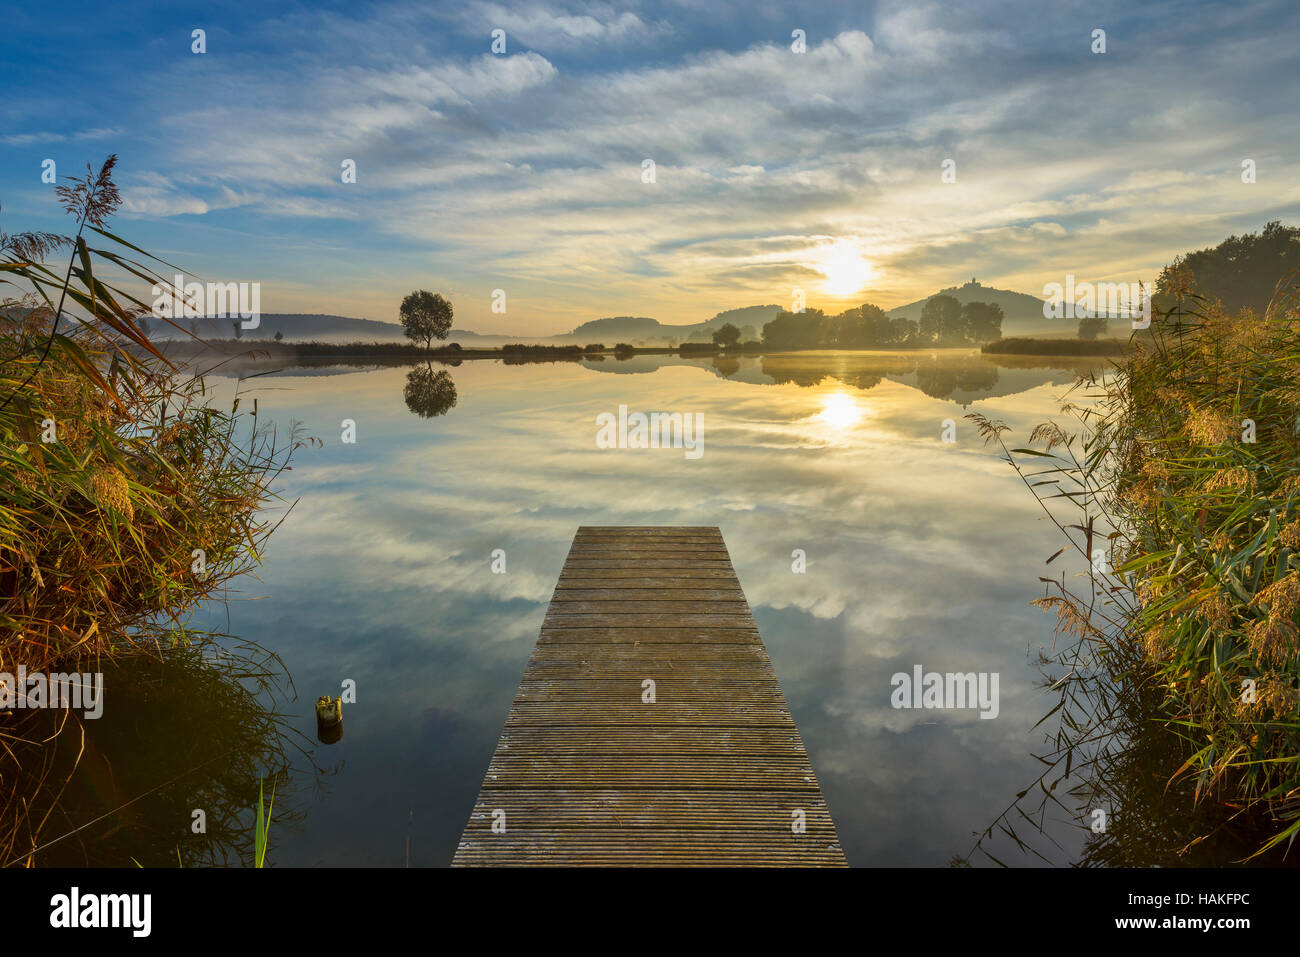 Wooden Jetty with Reflective Sky in Lake at Sunrise, Drei Gleichen, Ilm District, Thuringia, Germany Stock Photo